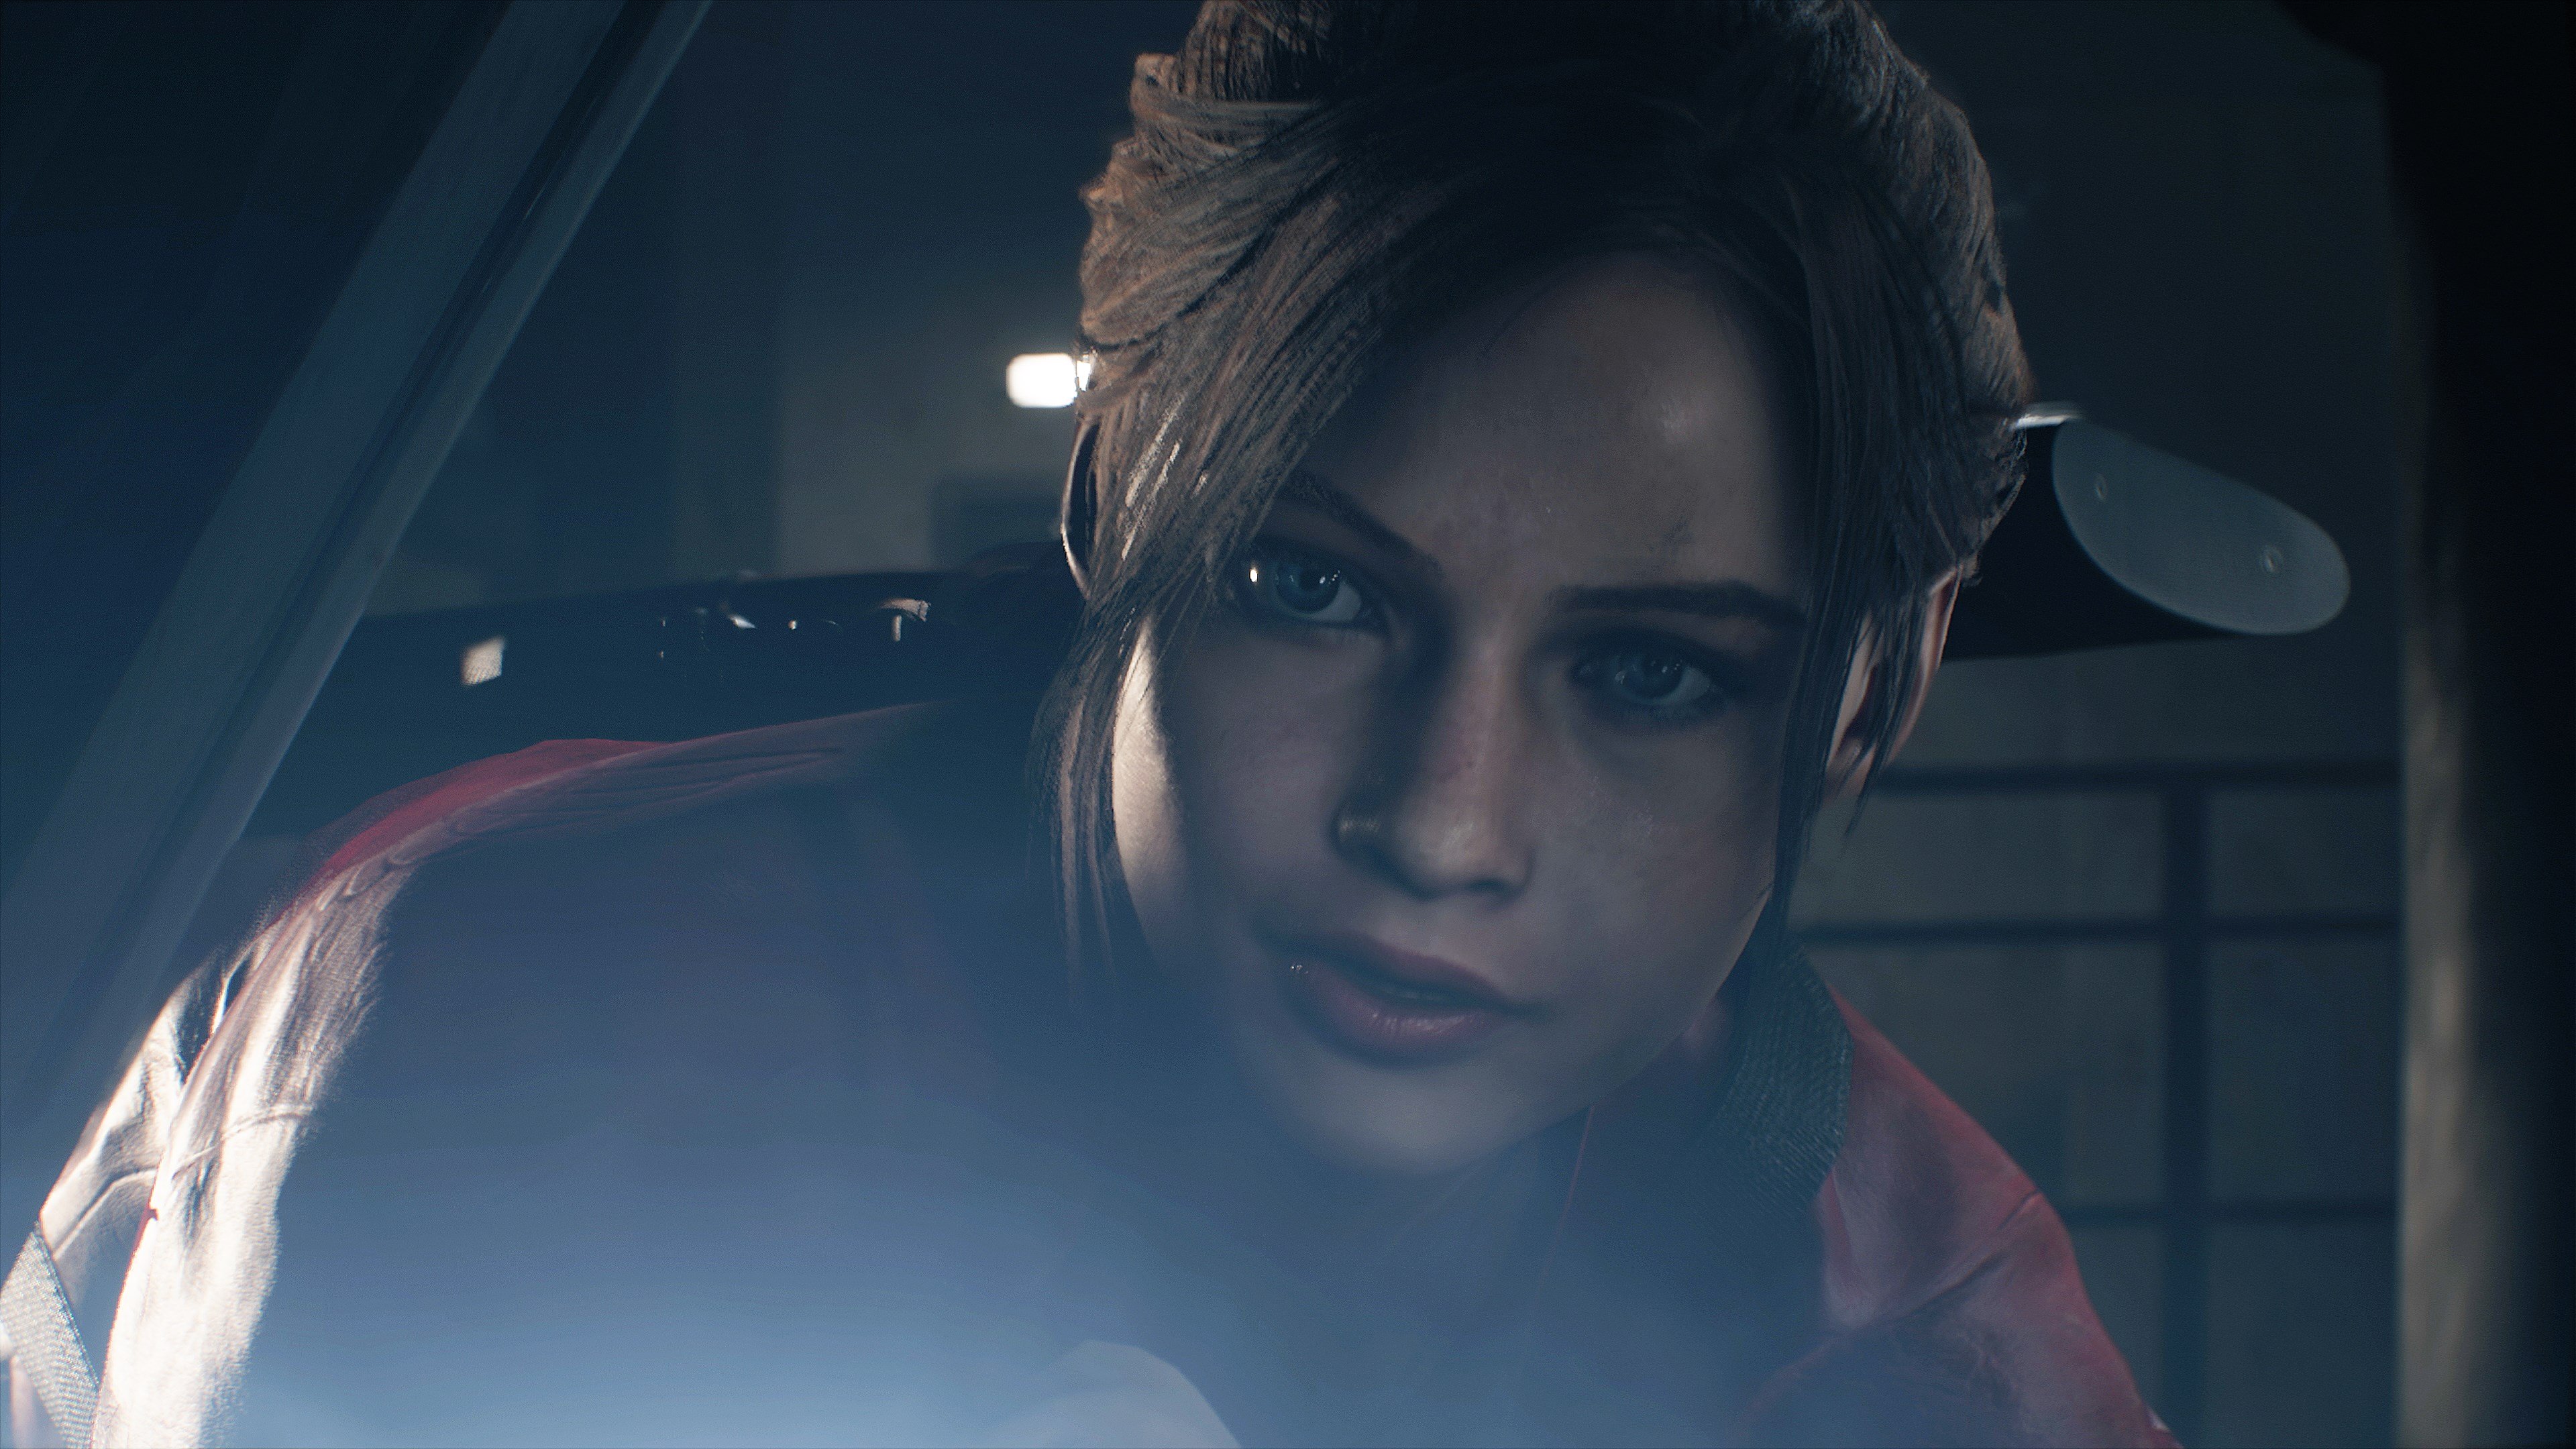 Resident Evil Resident Evil 2 Video Games Leon Kennedy Racoon City Claire Redfield Capcom 3840x2160